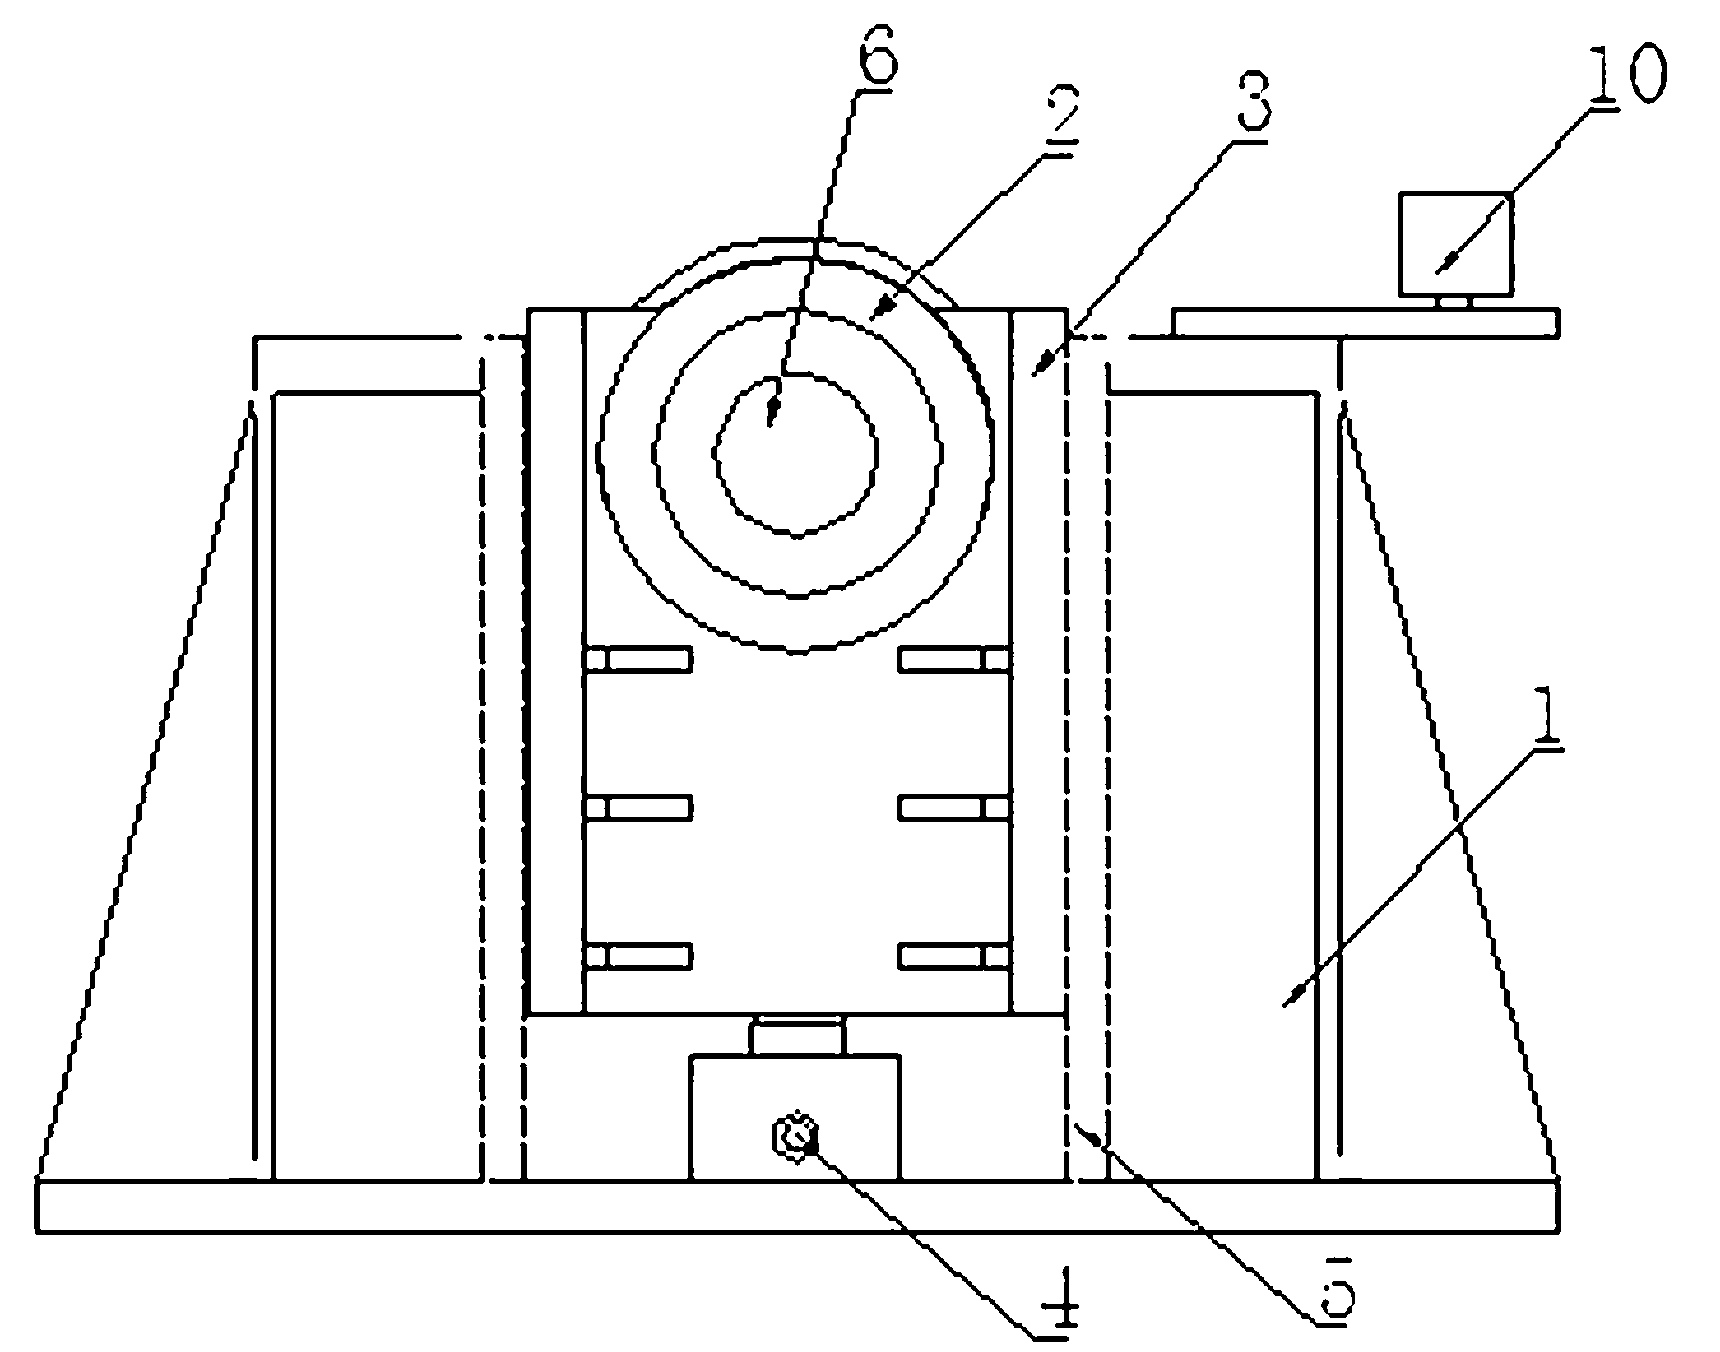 Heavy rotary supporting roller frame